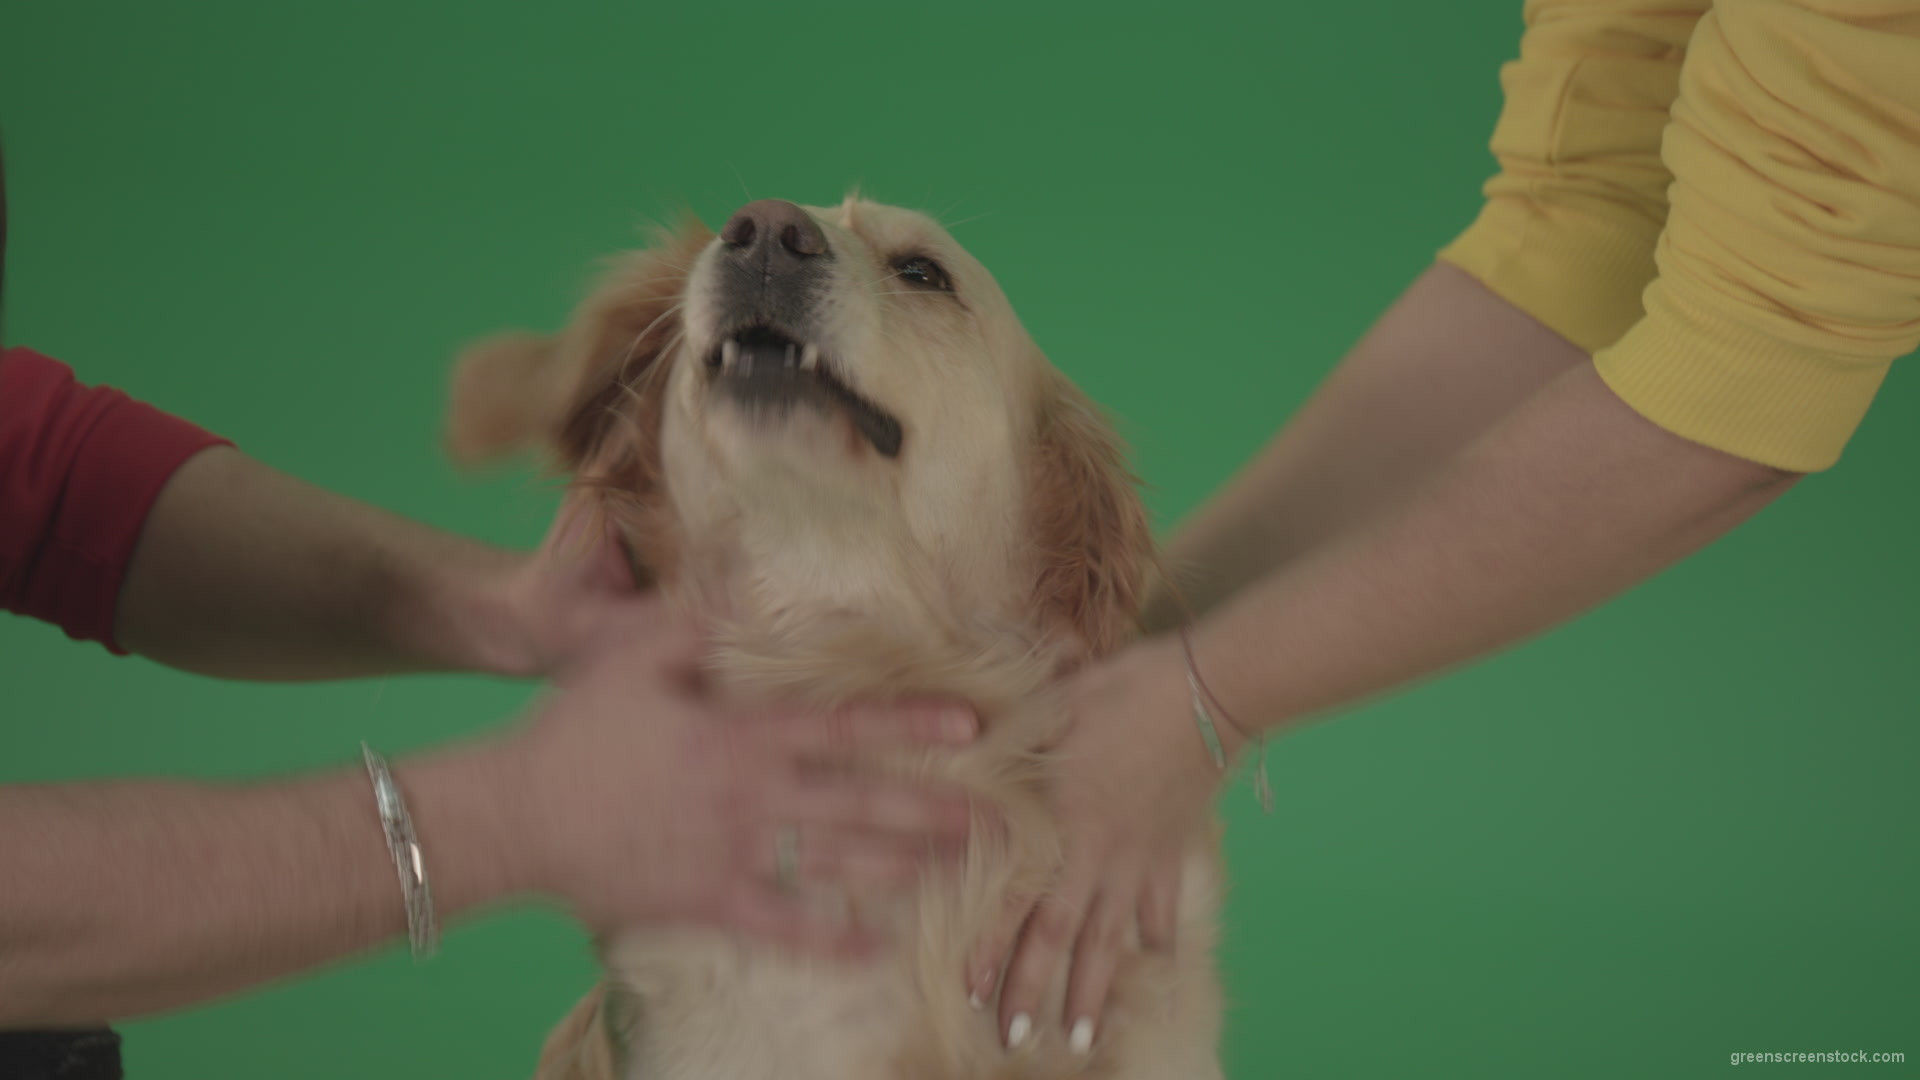 Funny-Golden-Retriever-owners-stroke-from-two-hands-hunter-Dog-isolated-on-green-screen-4K-video-footage_009 Green Screen Stock